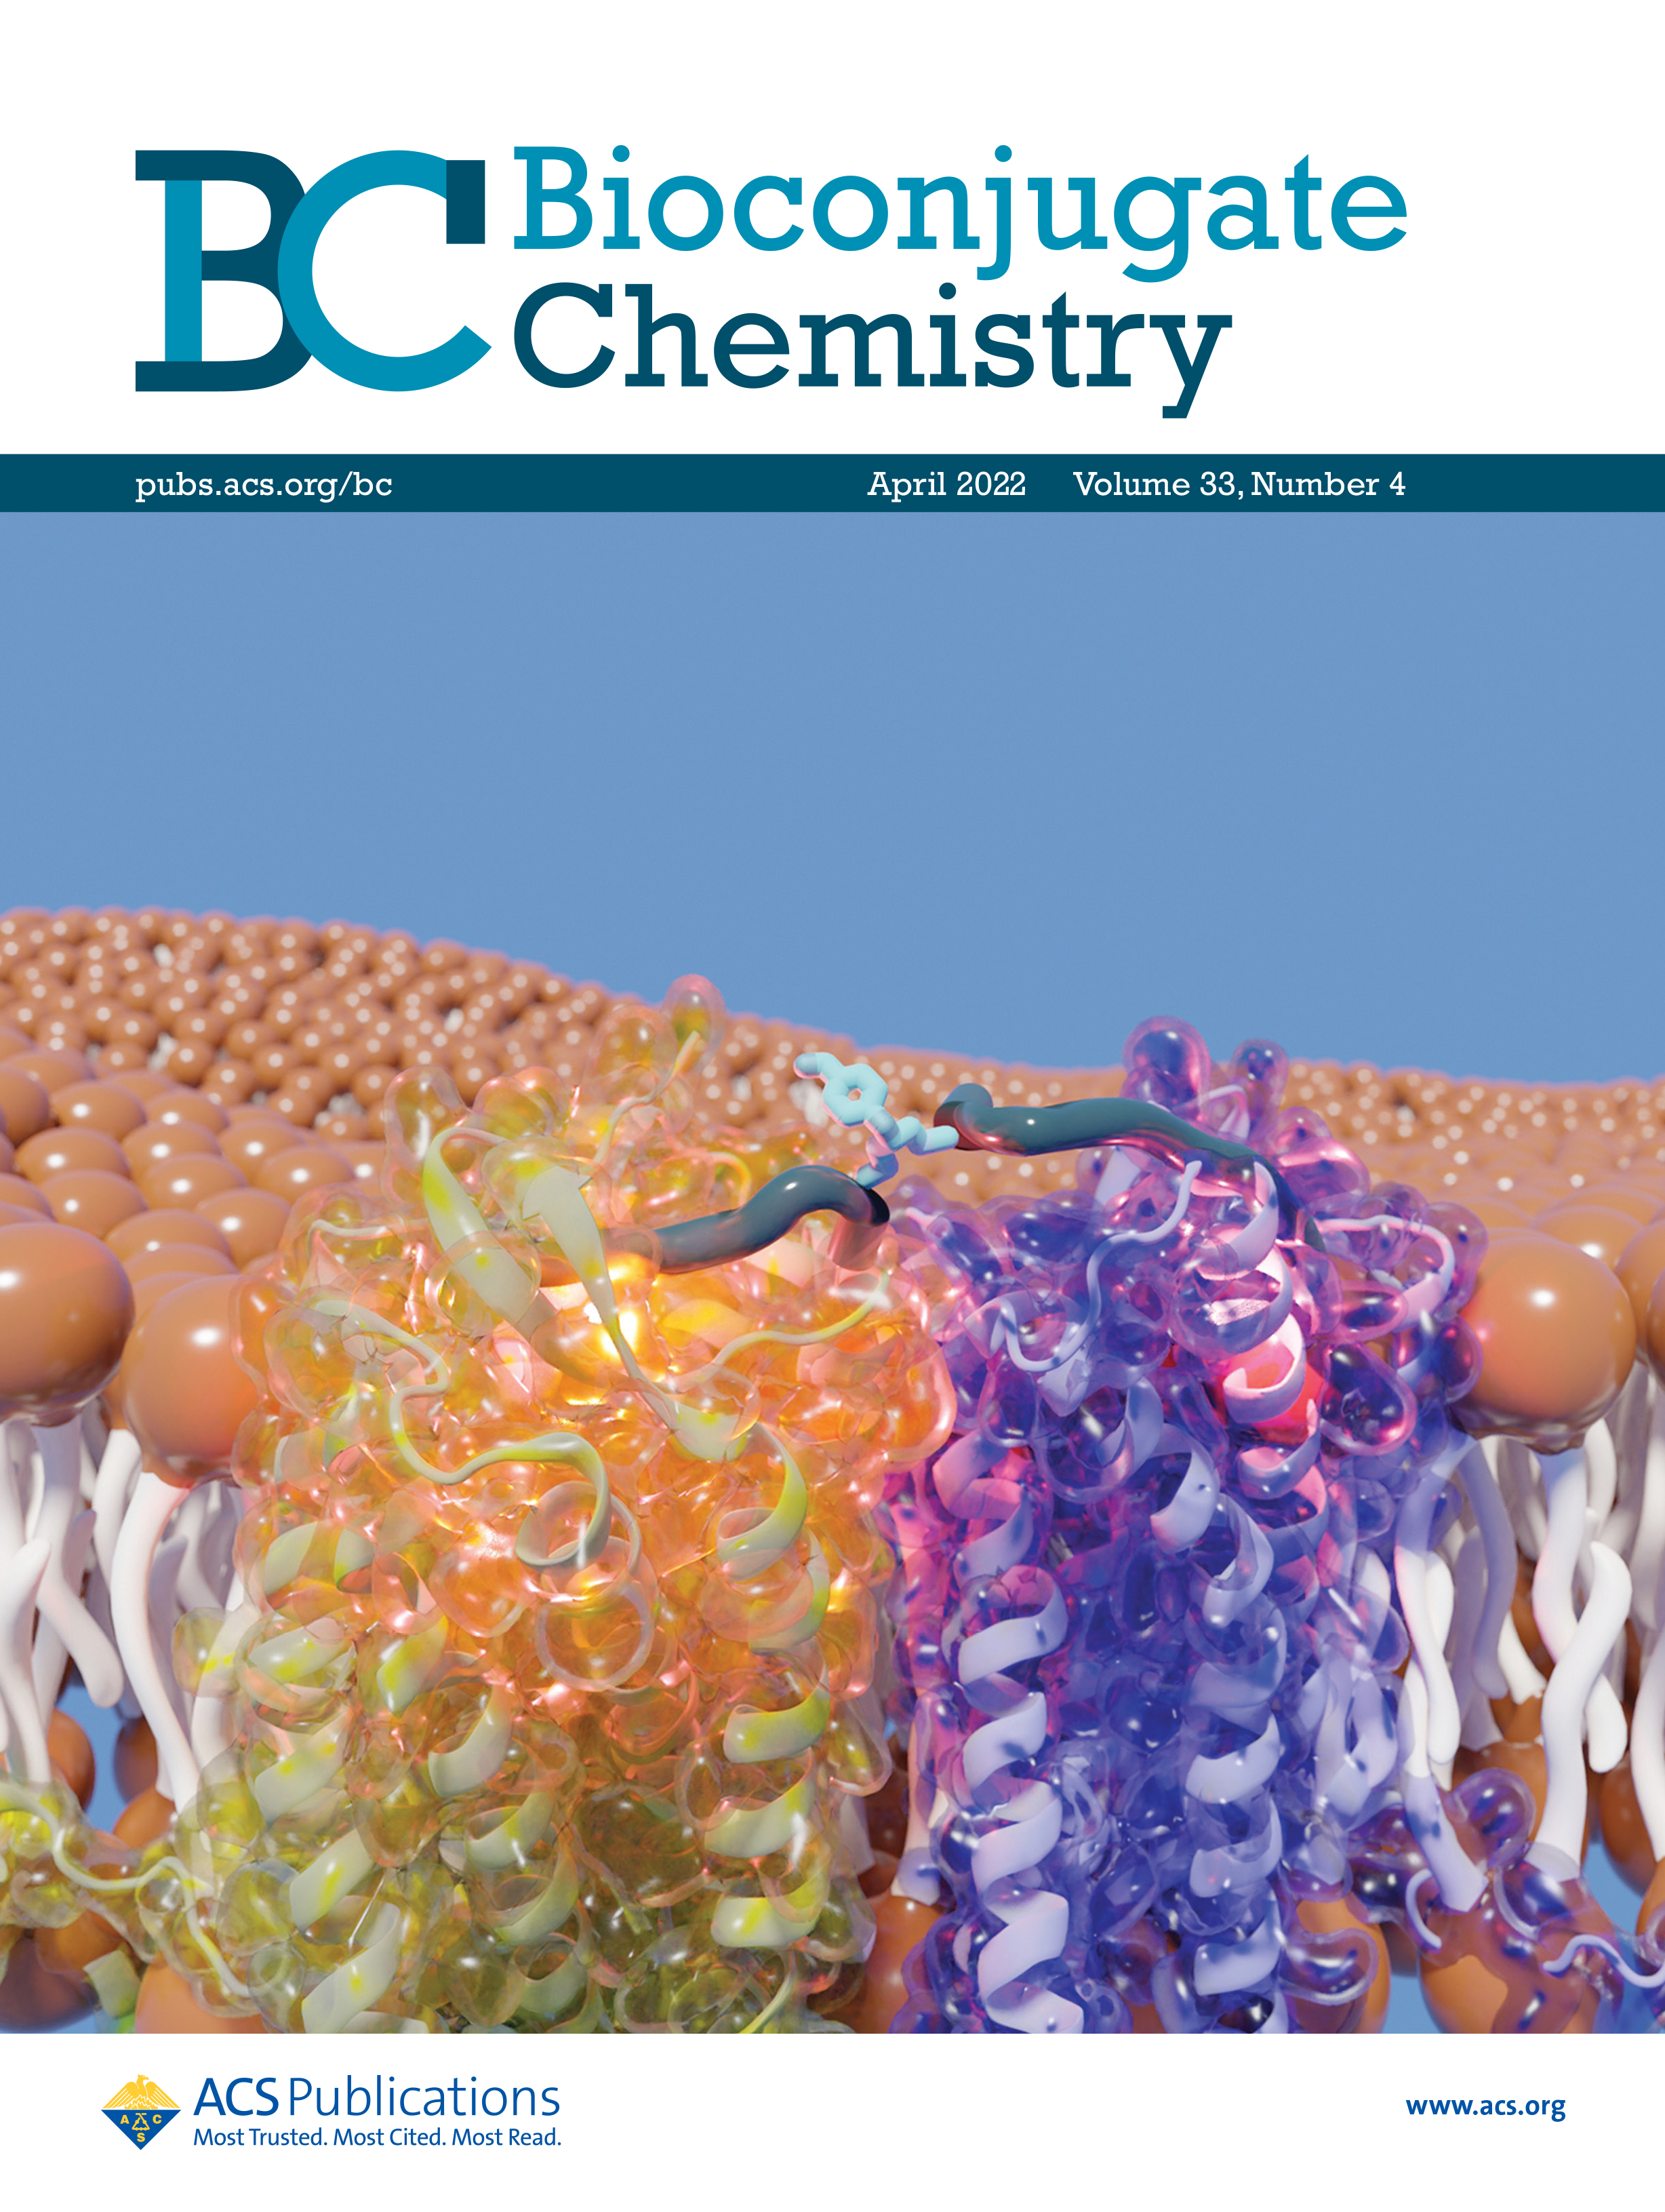 Cover of a journal